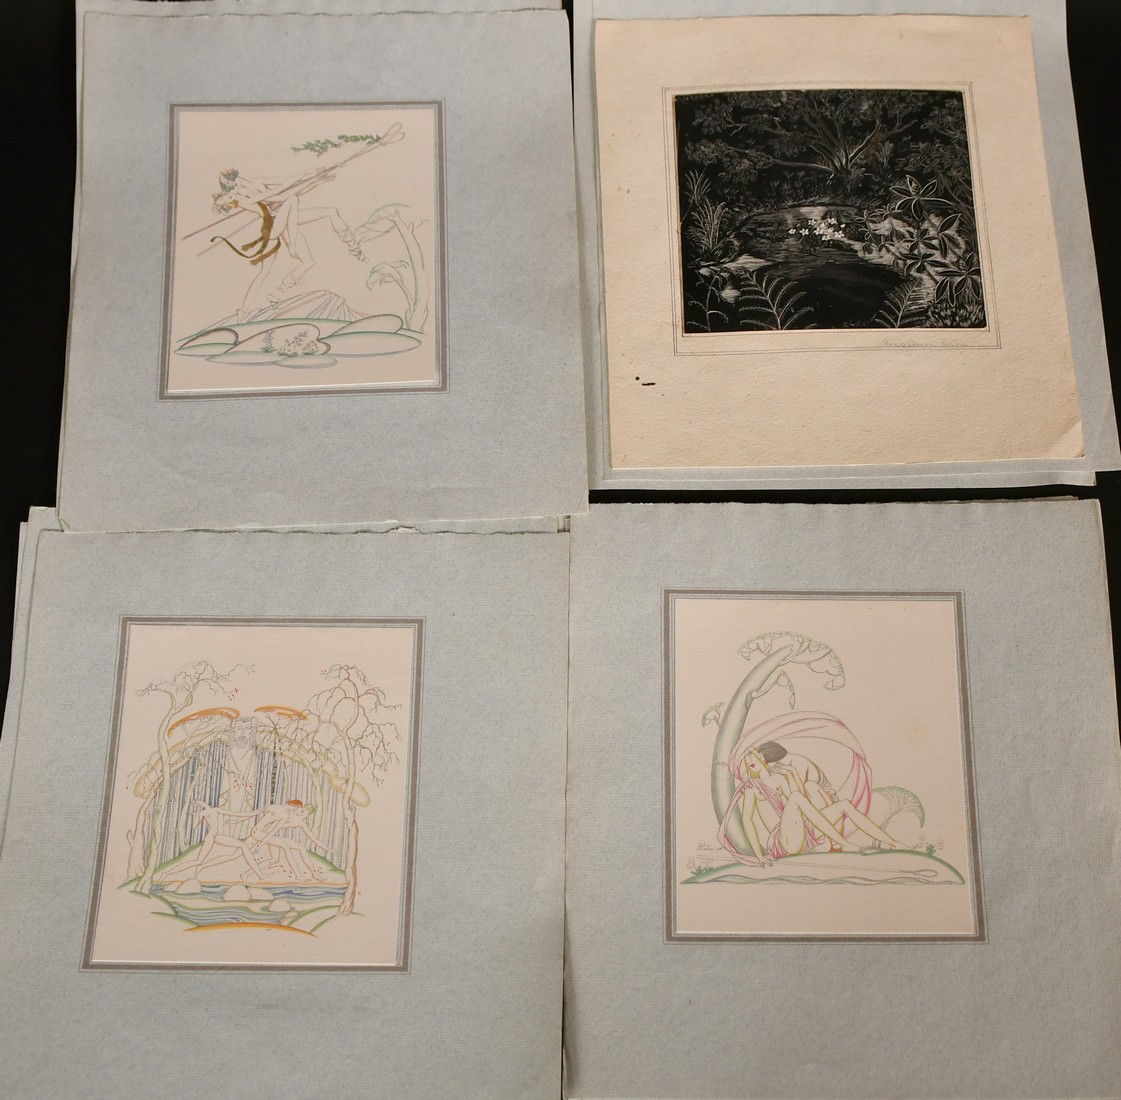 John Austen, A collection of twelve semi-erotic prints, one signed in pencil on the mount, 7" x 5. - Image 3 of 3